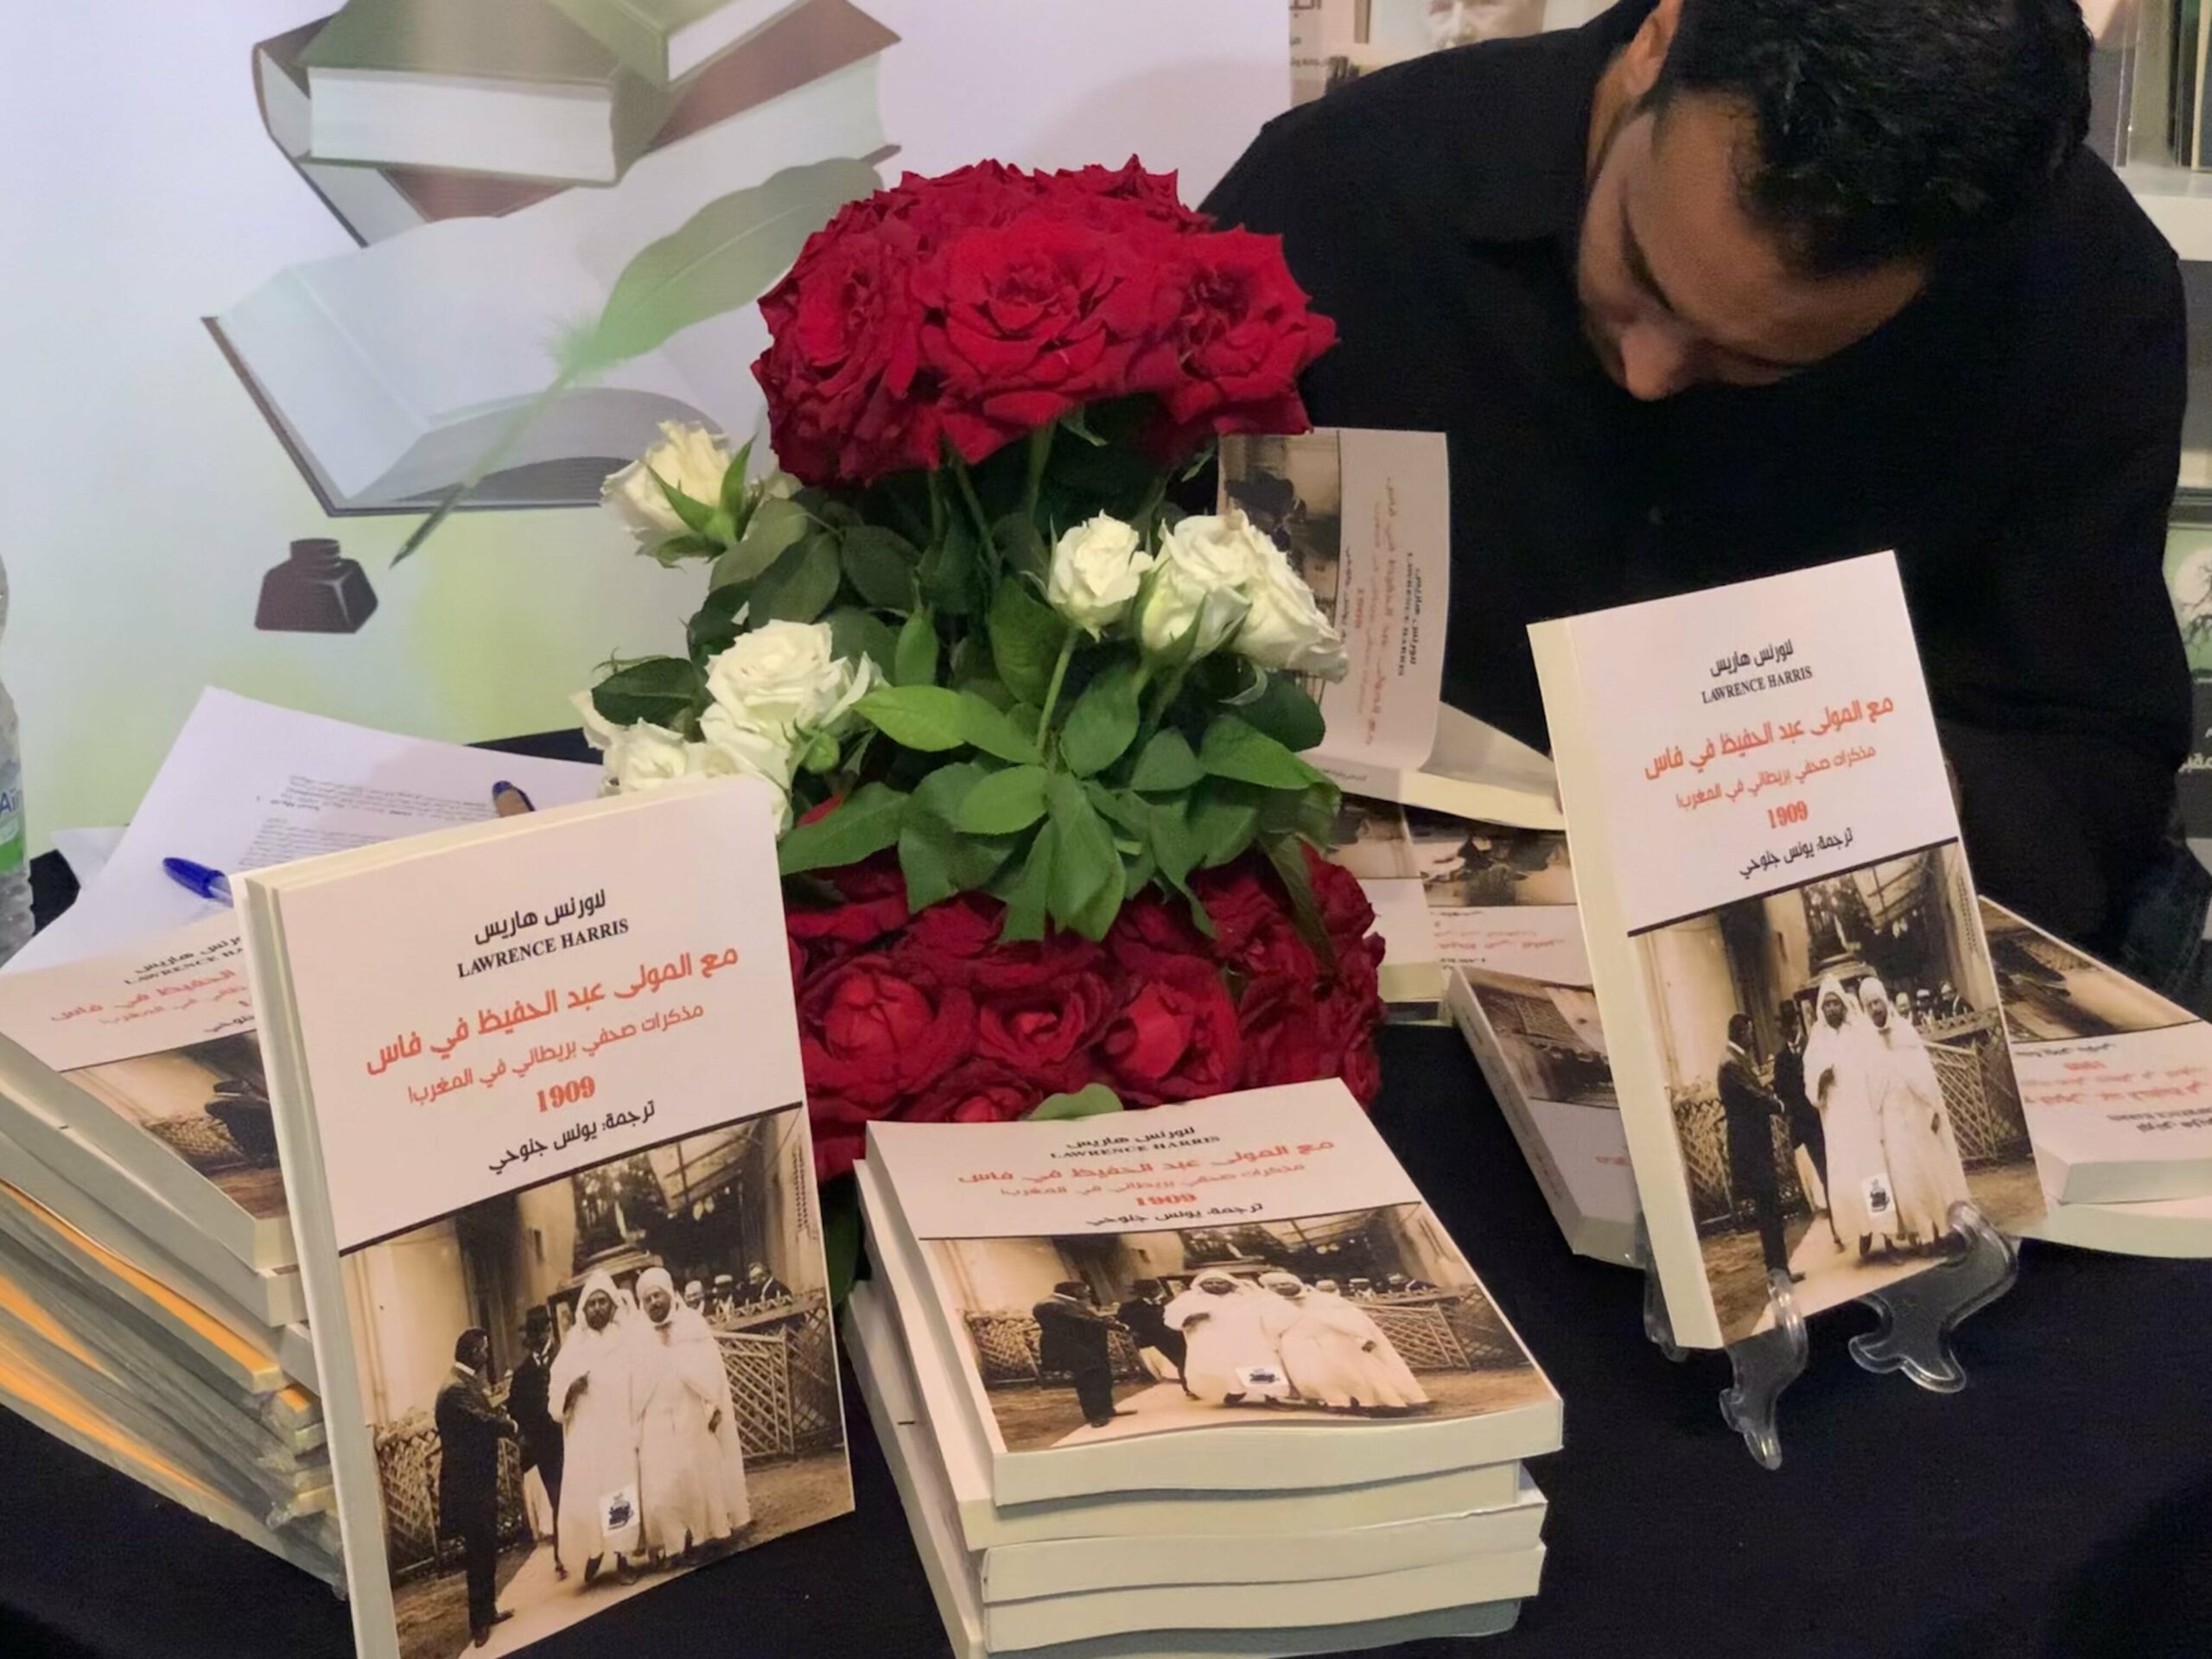 Book signing: “With Mulai Hafid at Fez”